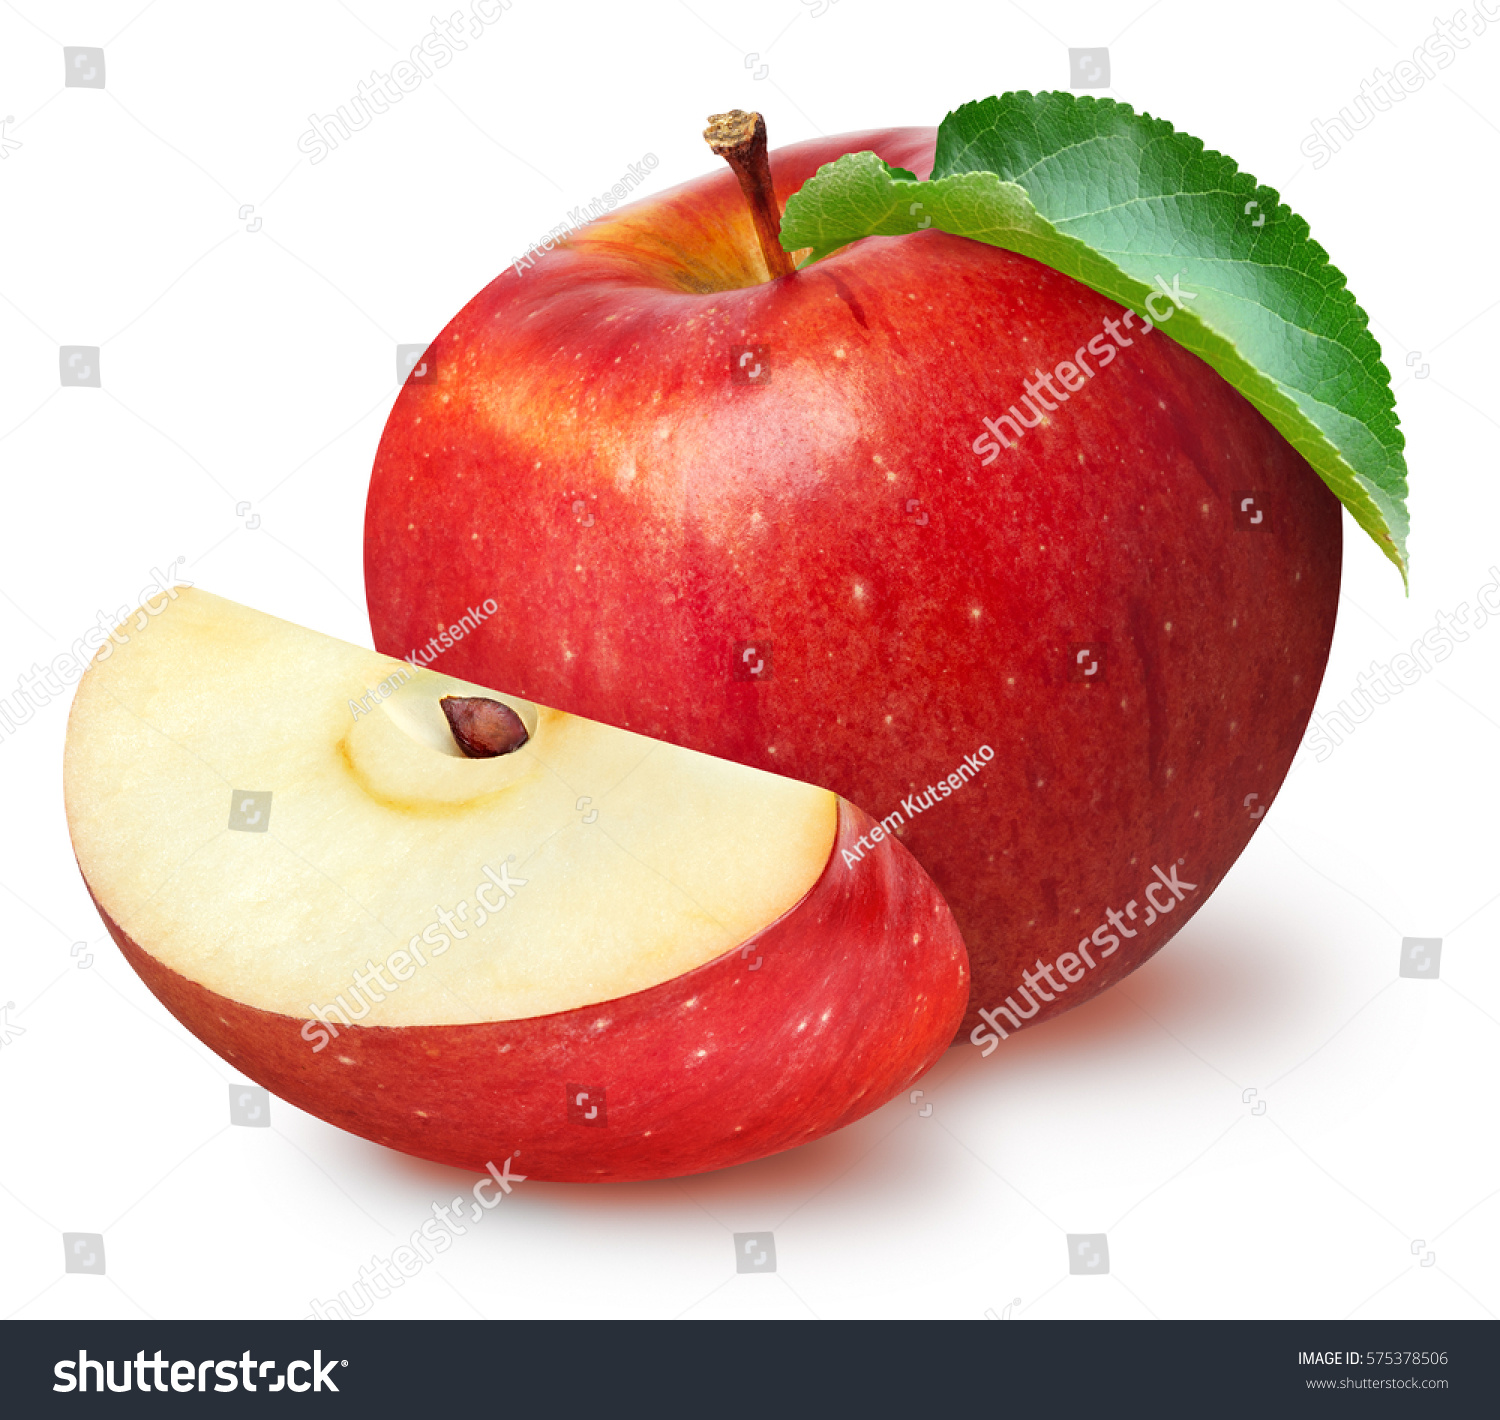 stock-photo-isolated-apples-whole-red-apple-fruit-with-slice-cut-isolated-on-white-with-clipping-path-575378506.jpg